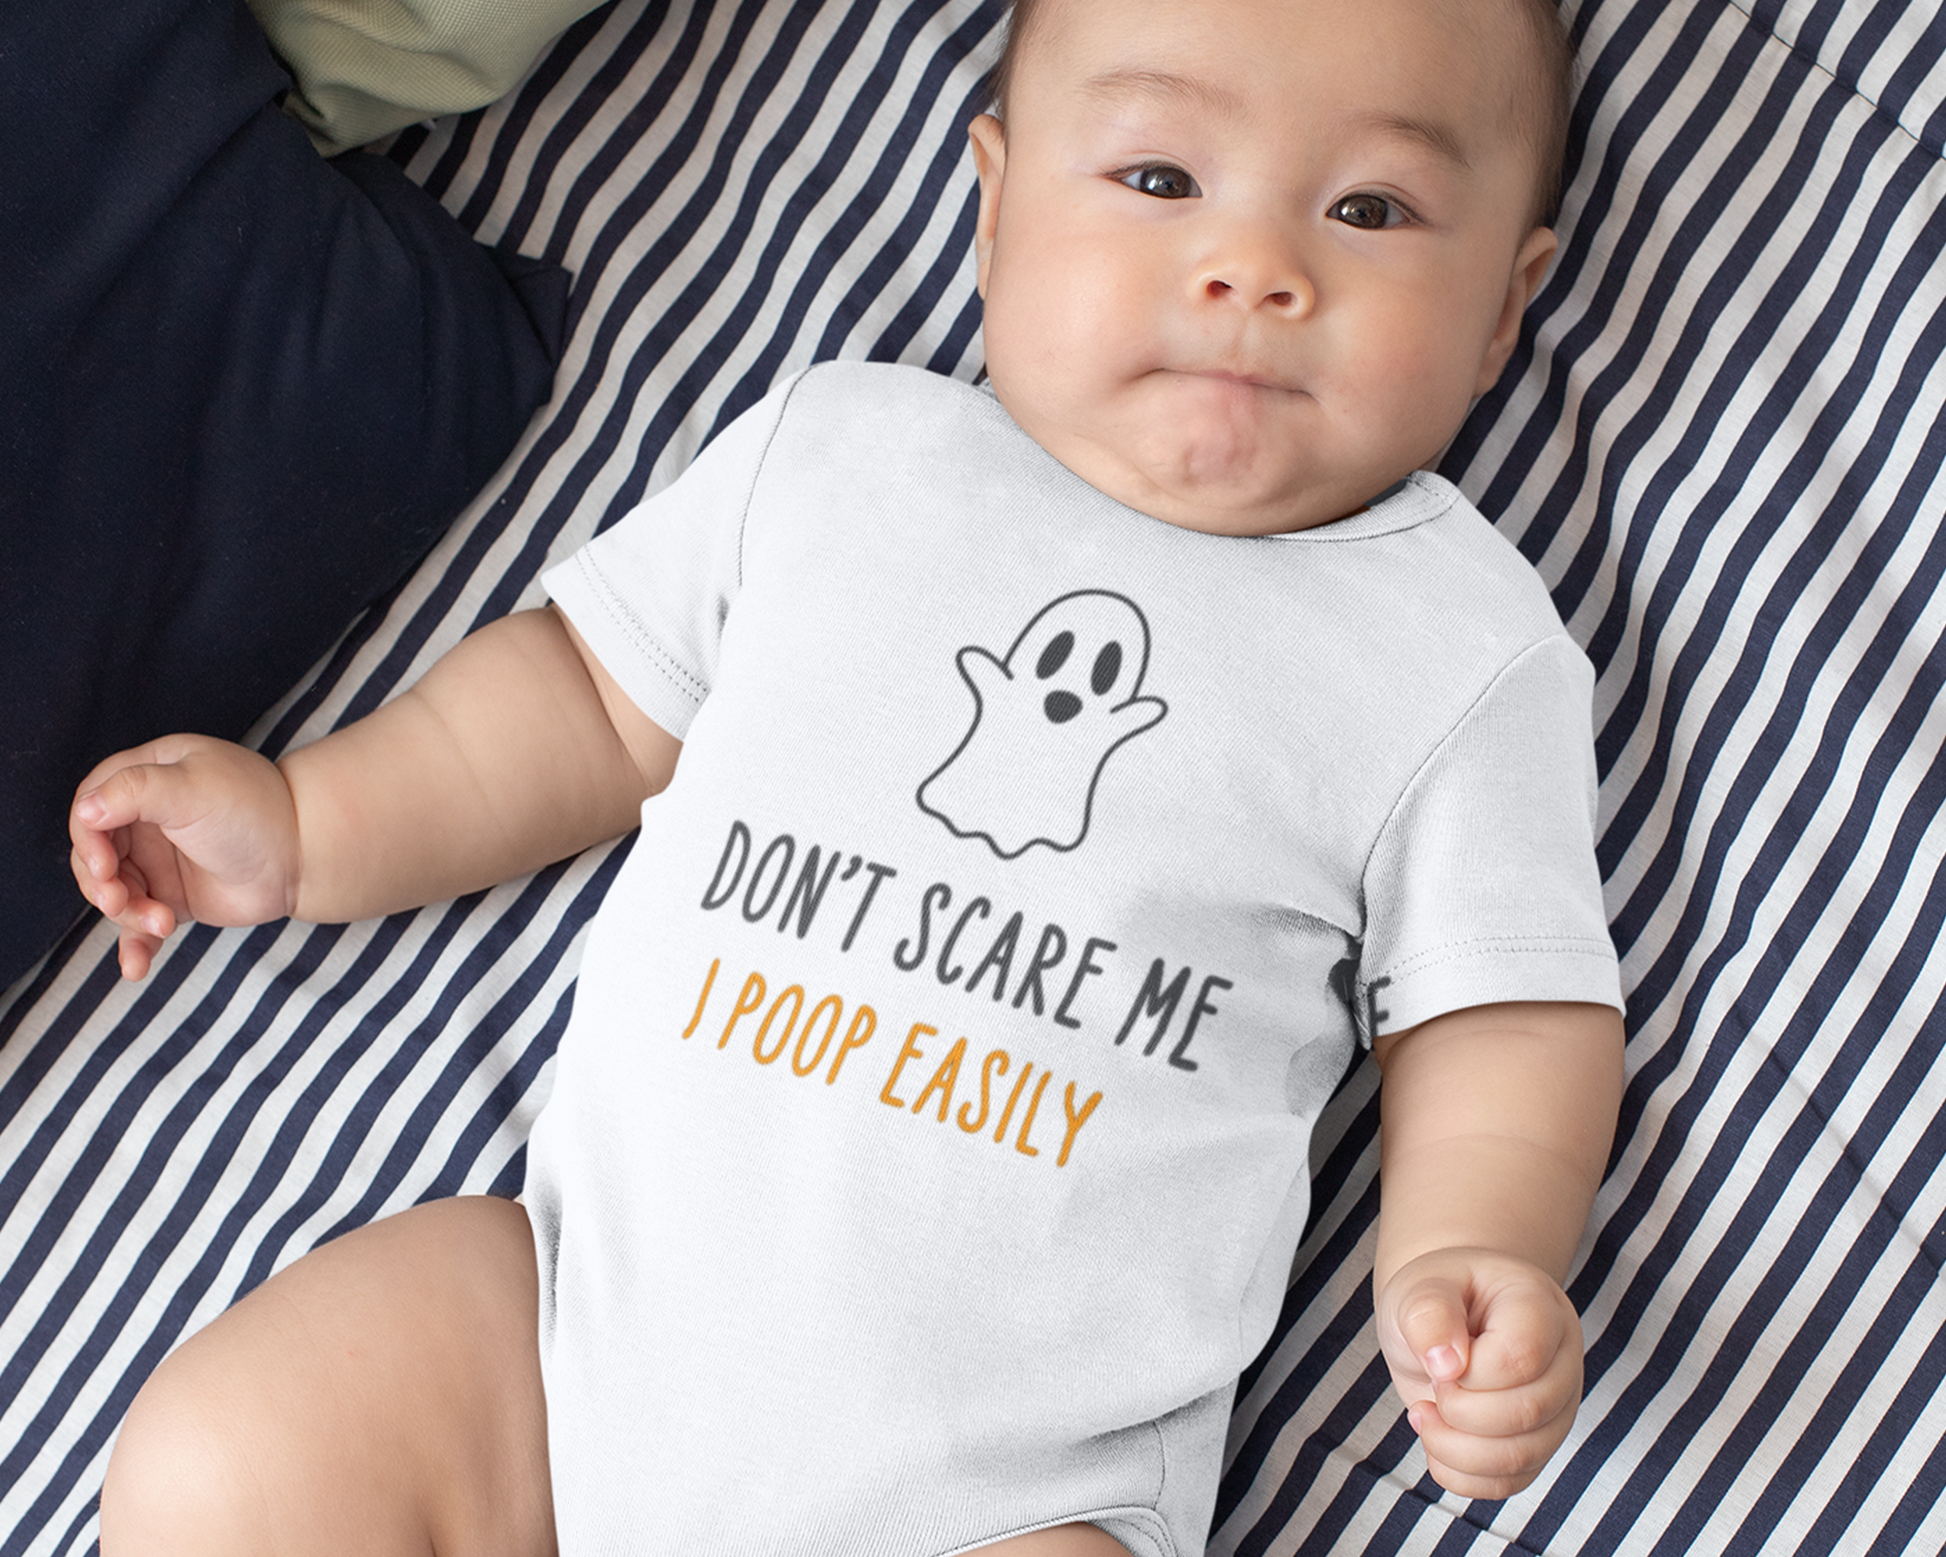 Kids Please Don't Make Me Adult Cute Funny Baby - Kids Fashion